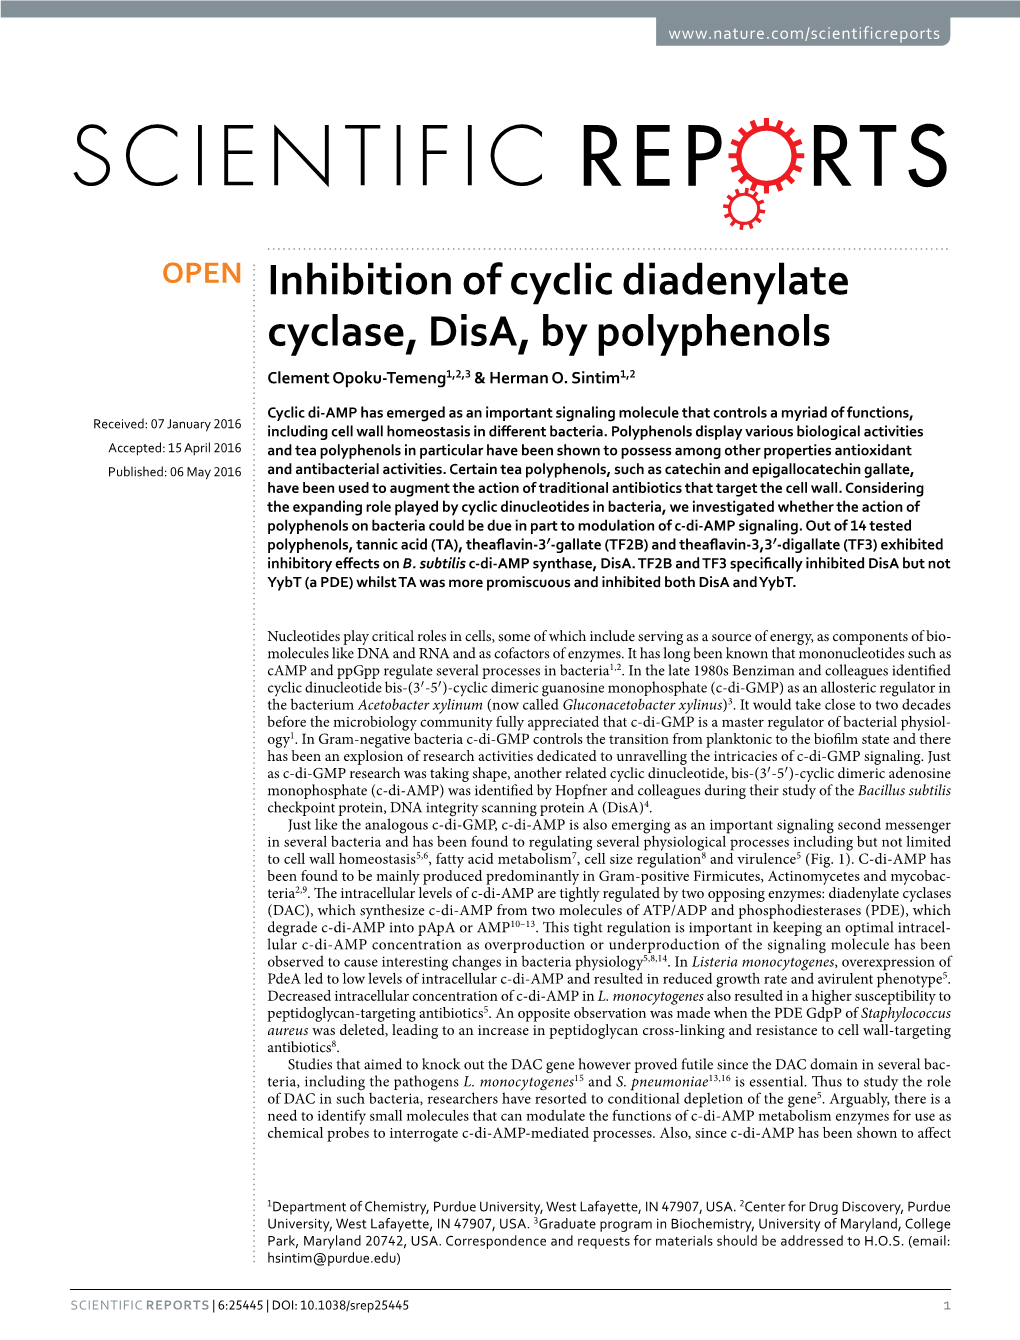 Inhibition of Cyclic Diadenylate Cyclase, Disa, by Polyphenols Clement Opoku-Temeng1,2,3 & Herman O